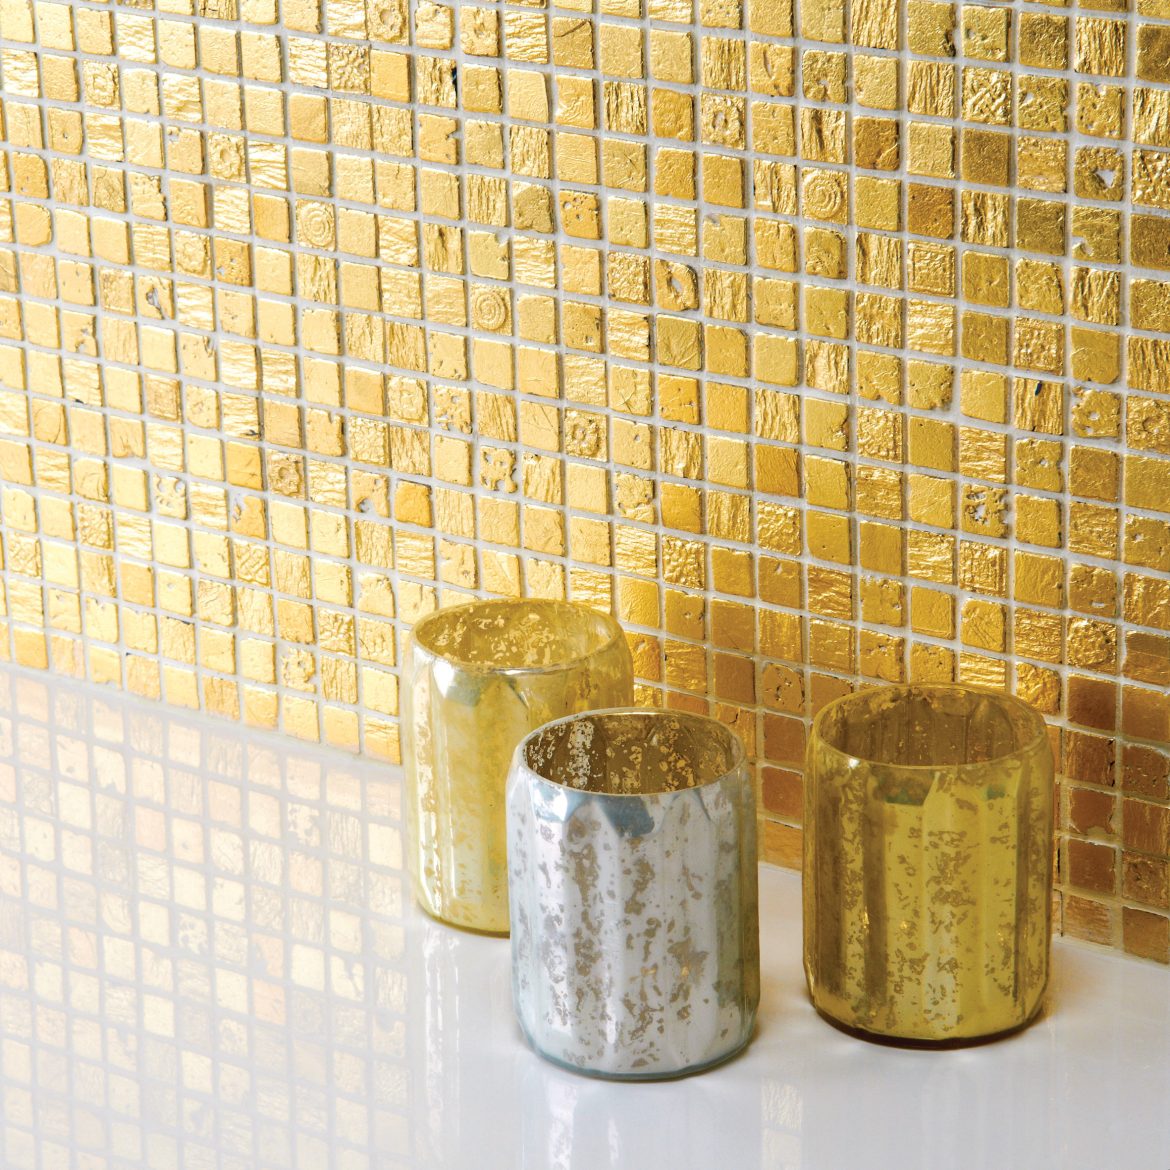 Stone Mosaic Tile: A New Trend in the Interior Design World